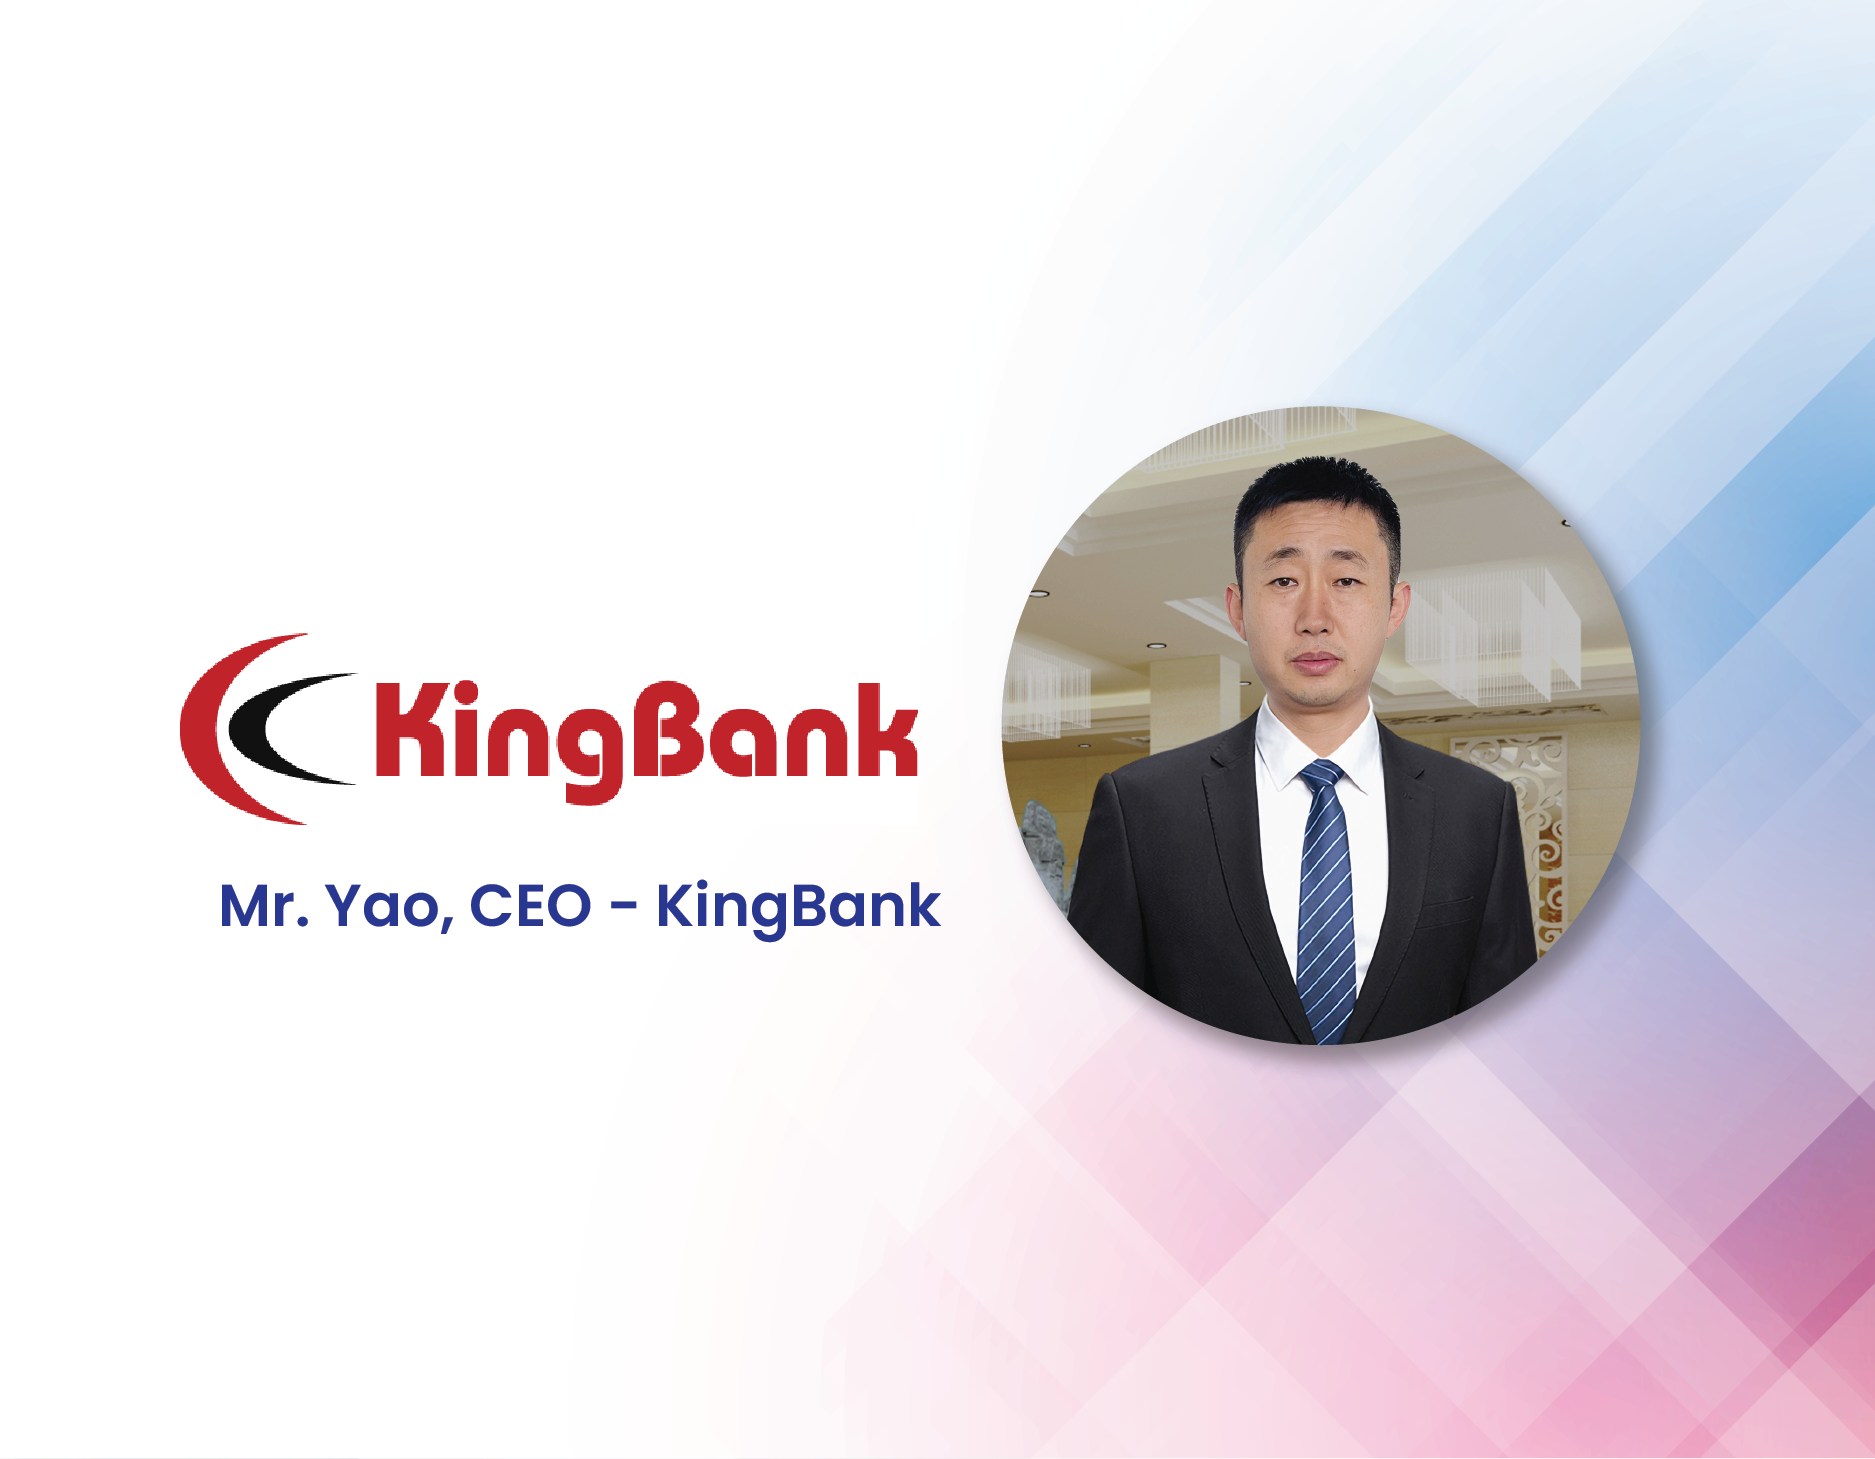 Interview with Mr. Yao, CEO - KingBank: Navigating Quality, Customer-Centricity, and Global Expansion